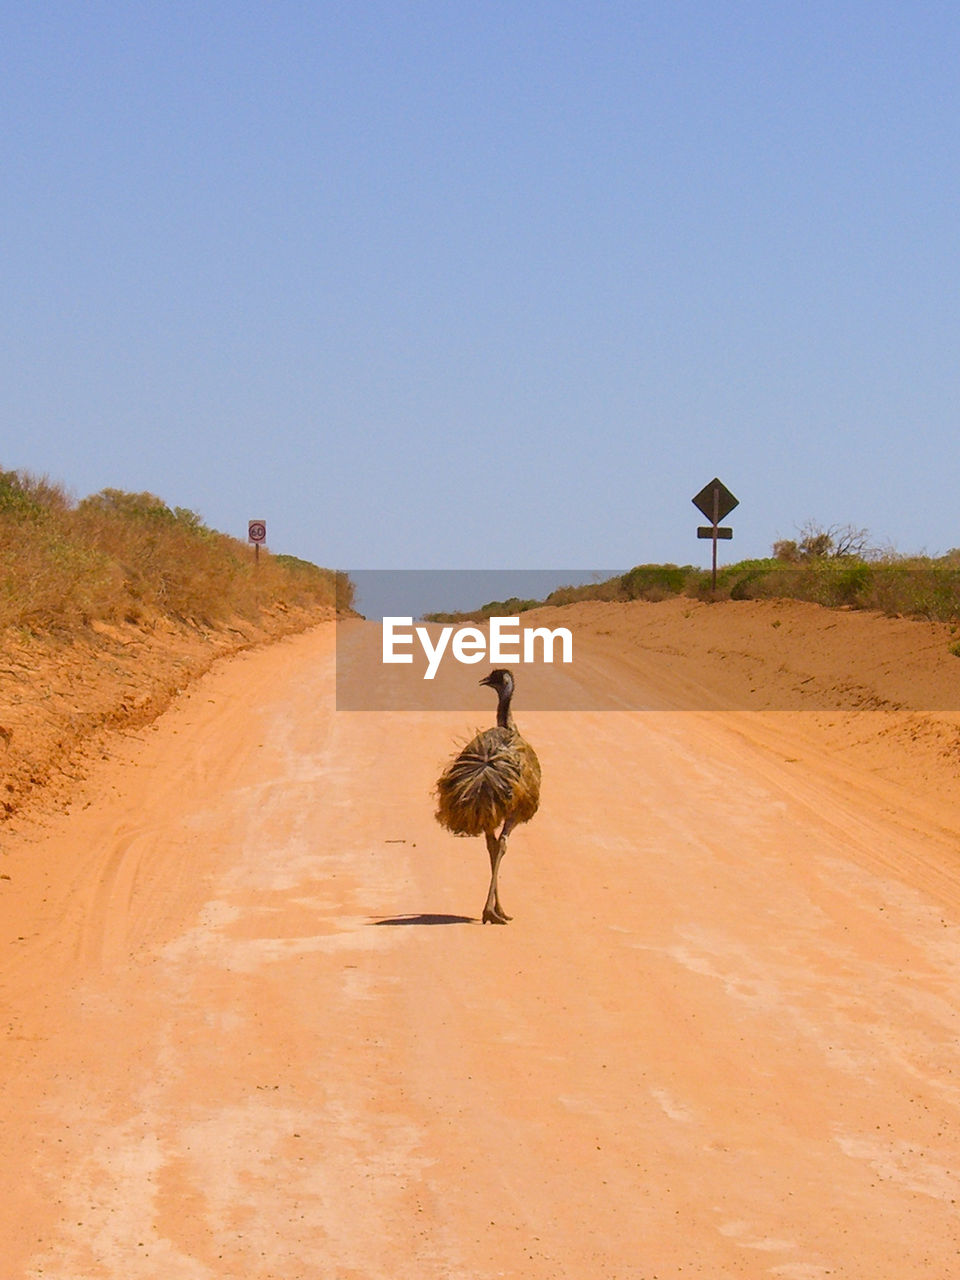 View of an emu on a street